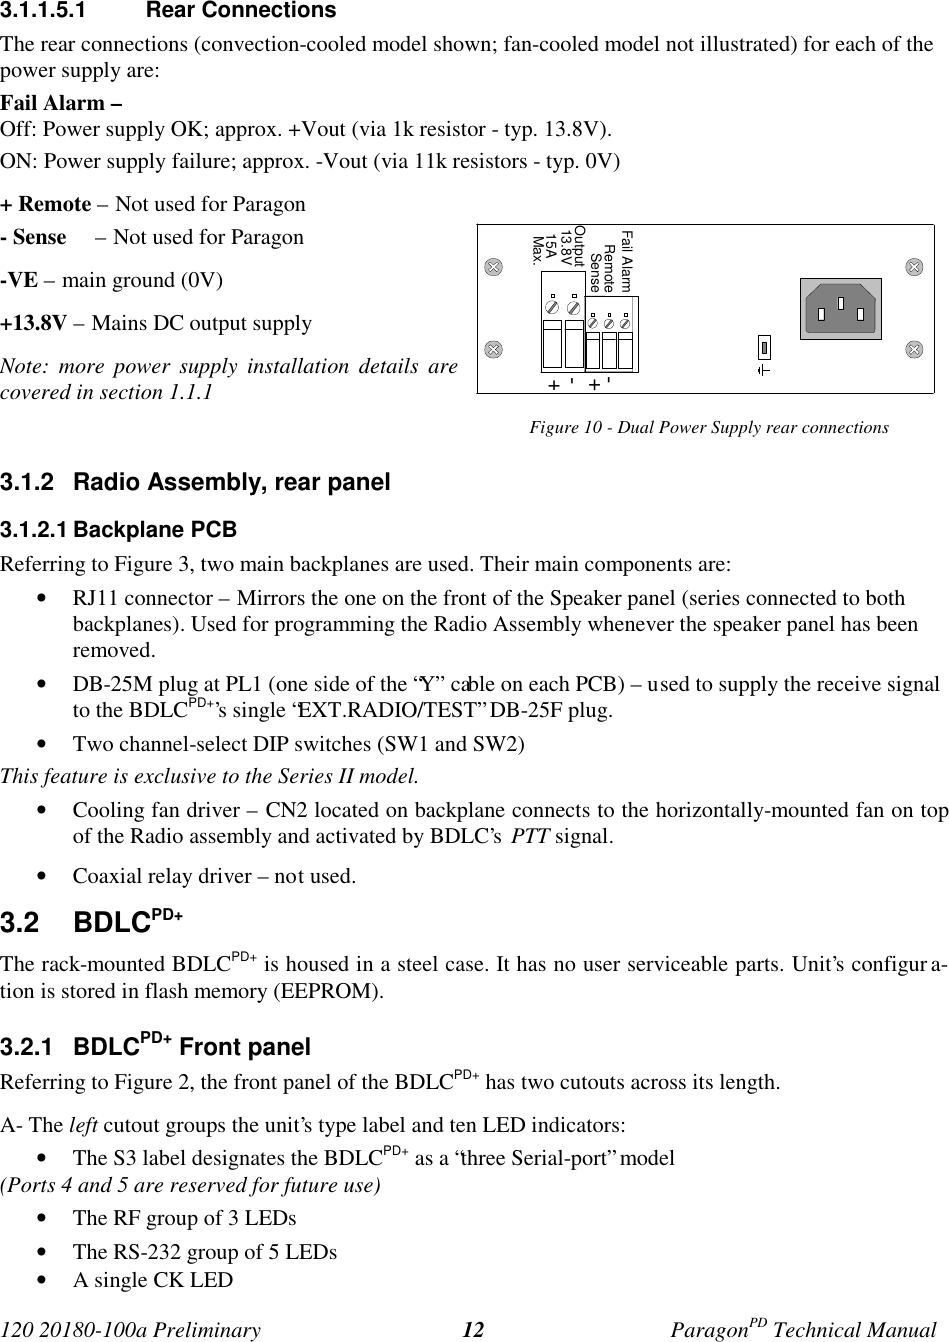 Page 19 of CalAmp Wireless Networks BDD4T881S2 ParagonPD User Manual Parg PD  T100a Prelim